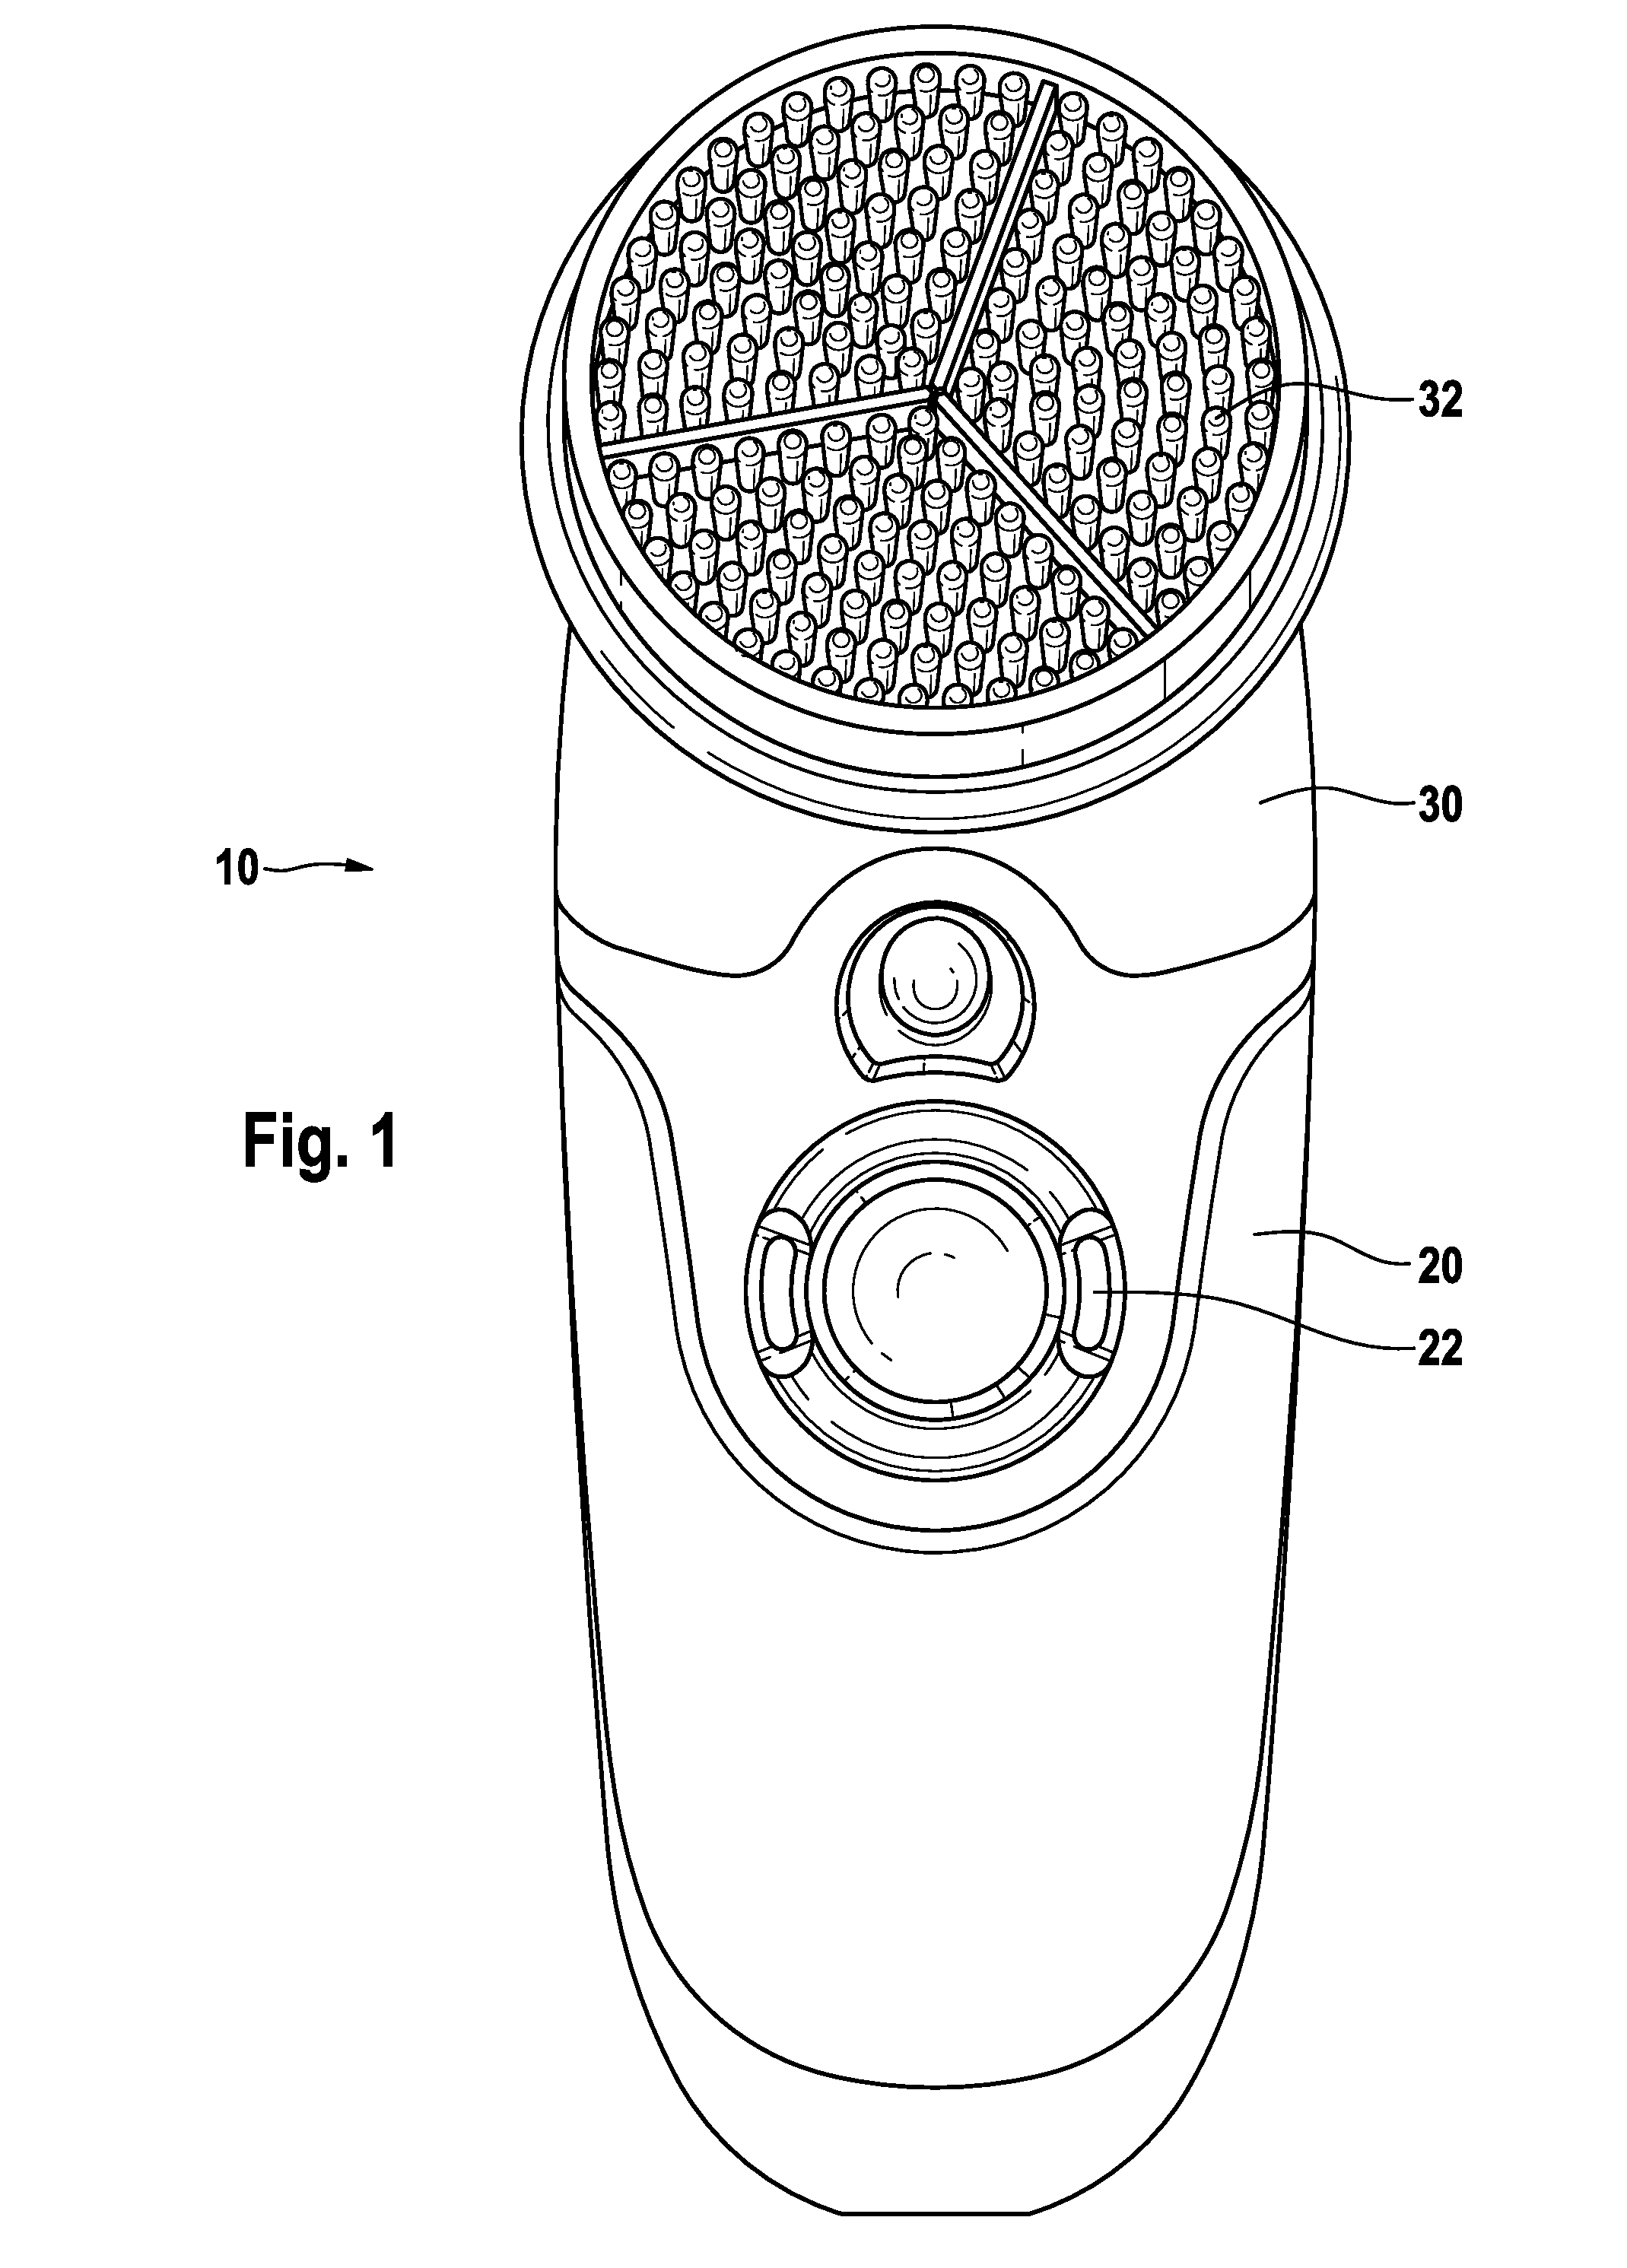 Skin treatment device and implement